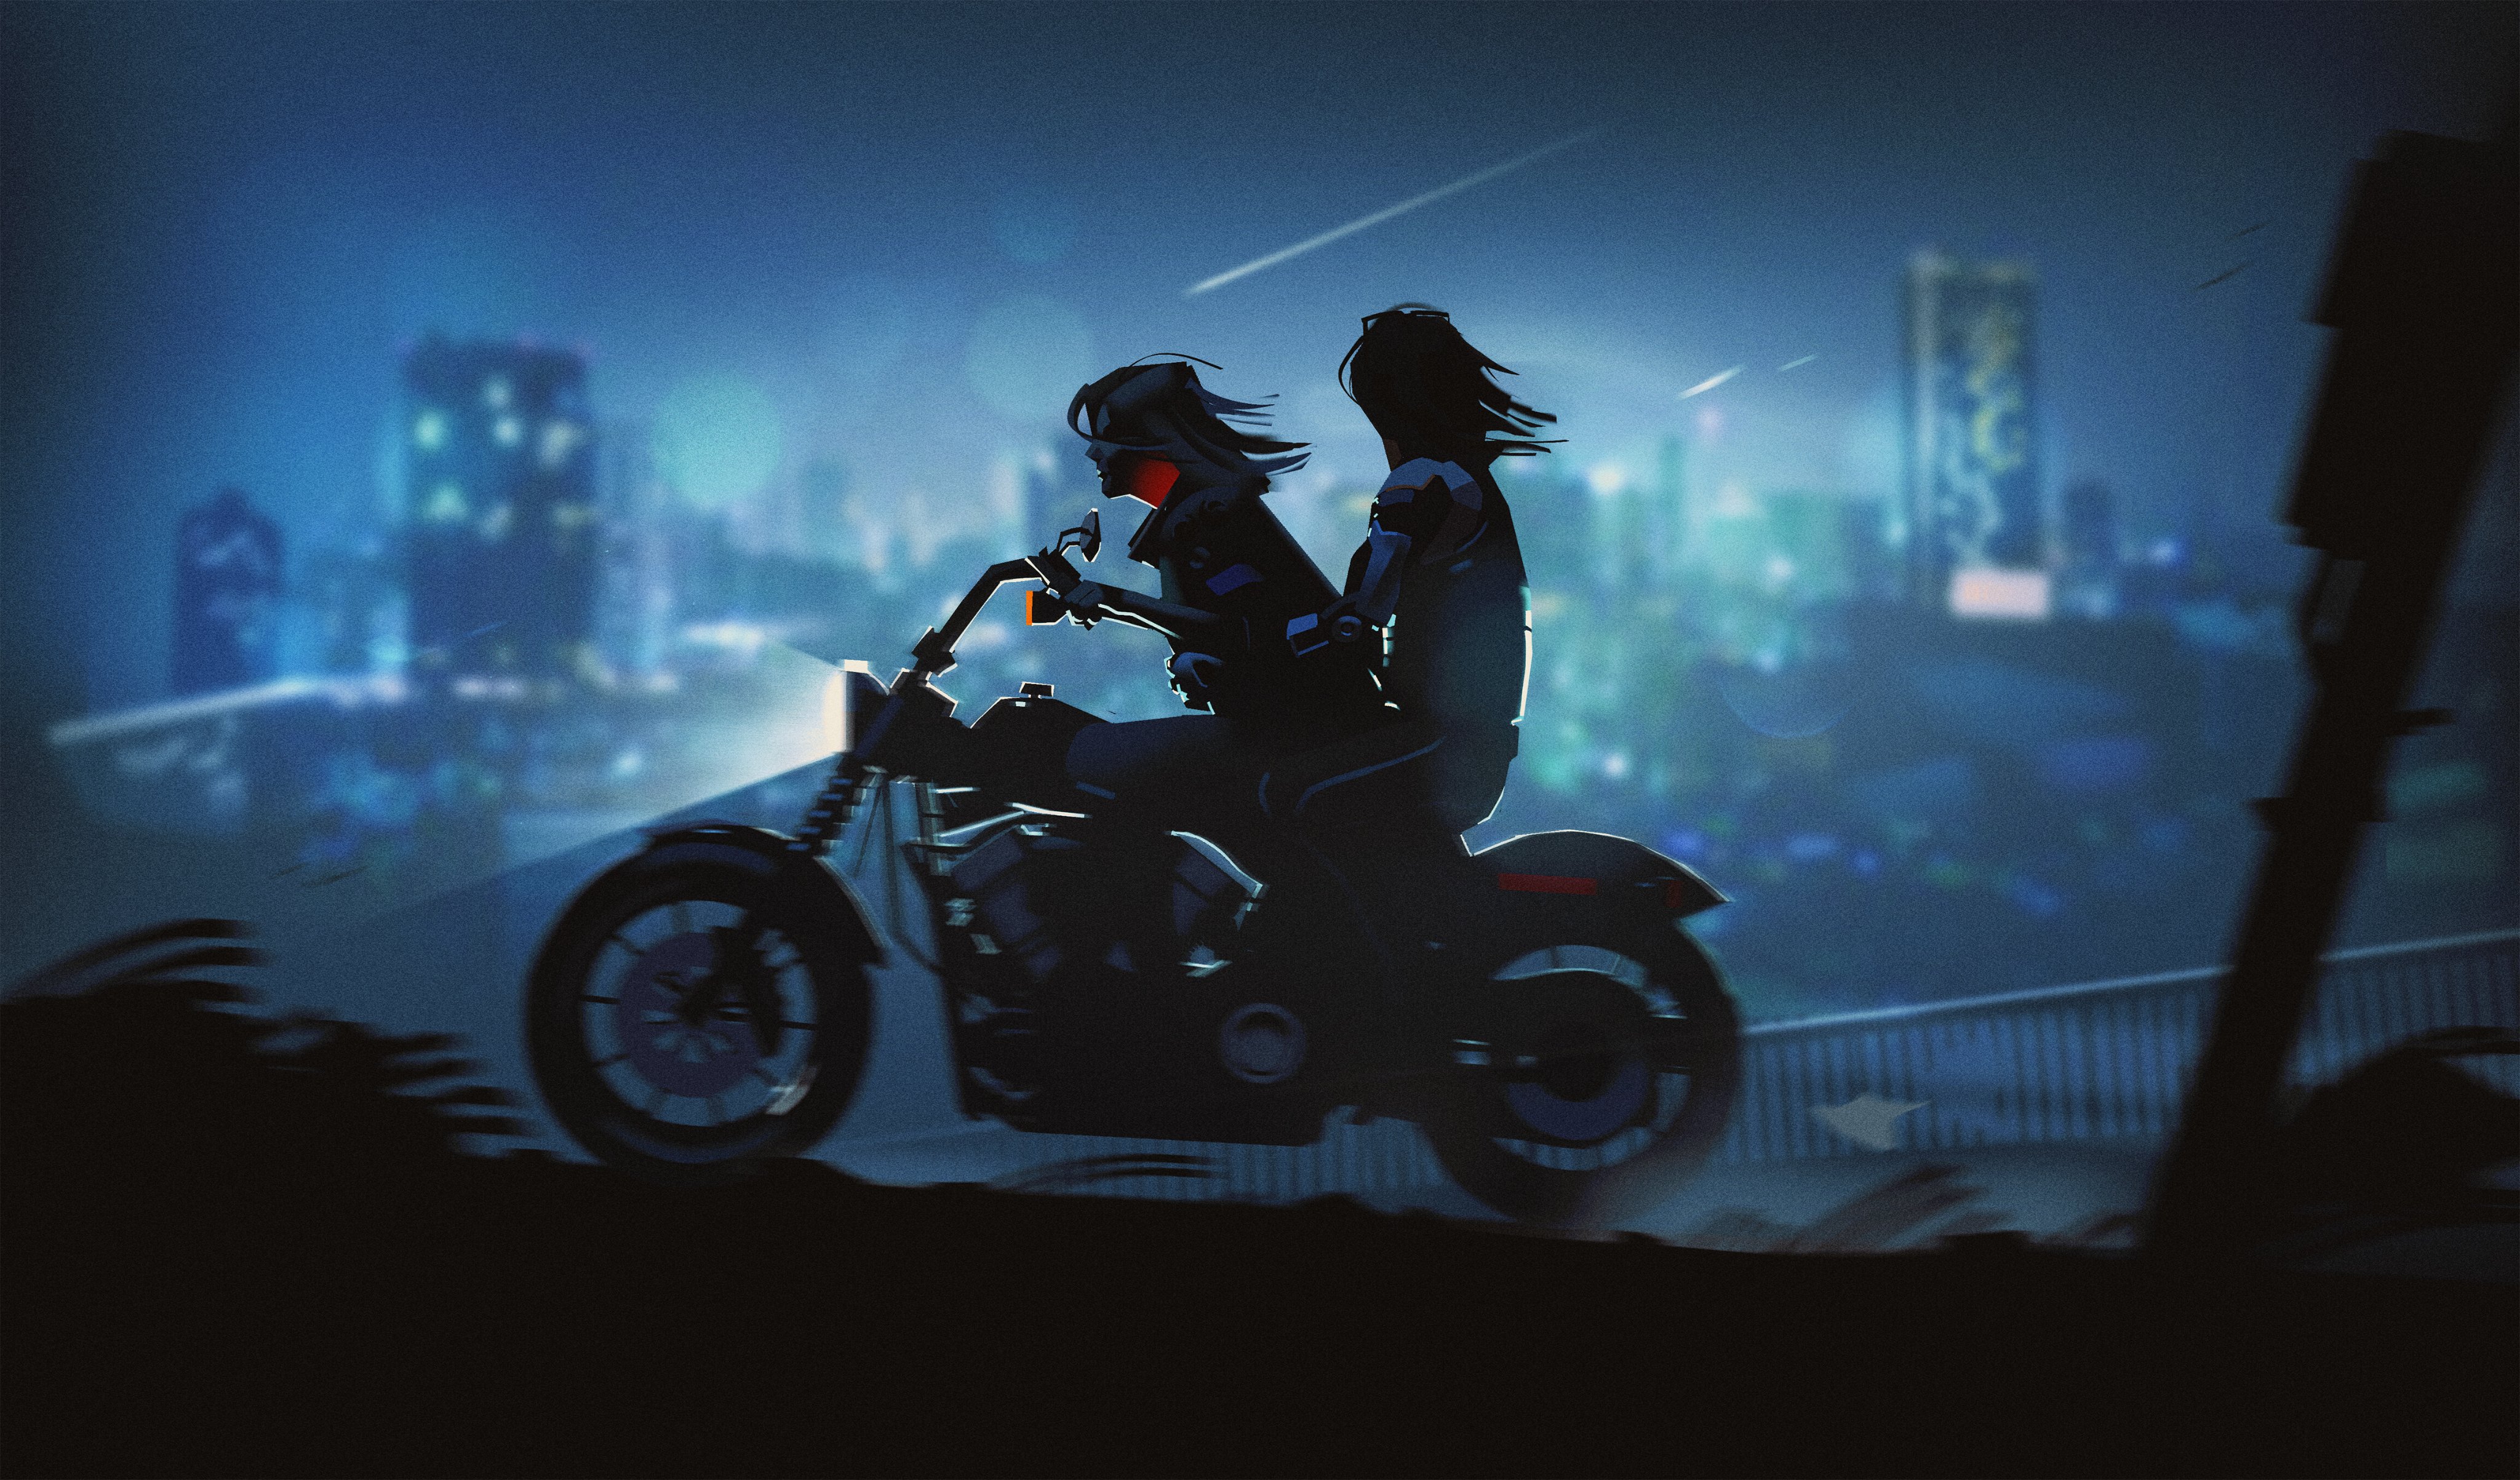 General 4096x2406 Poisonpink digital art artwork illustration digital painting night nightscape couple motorcycle city blurry background